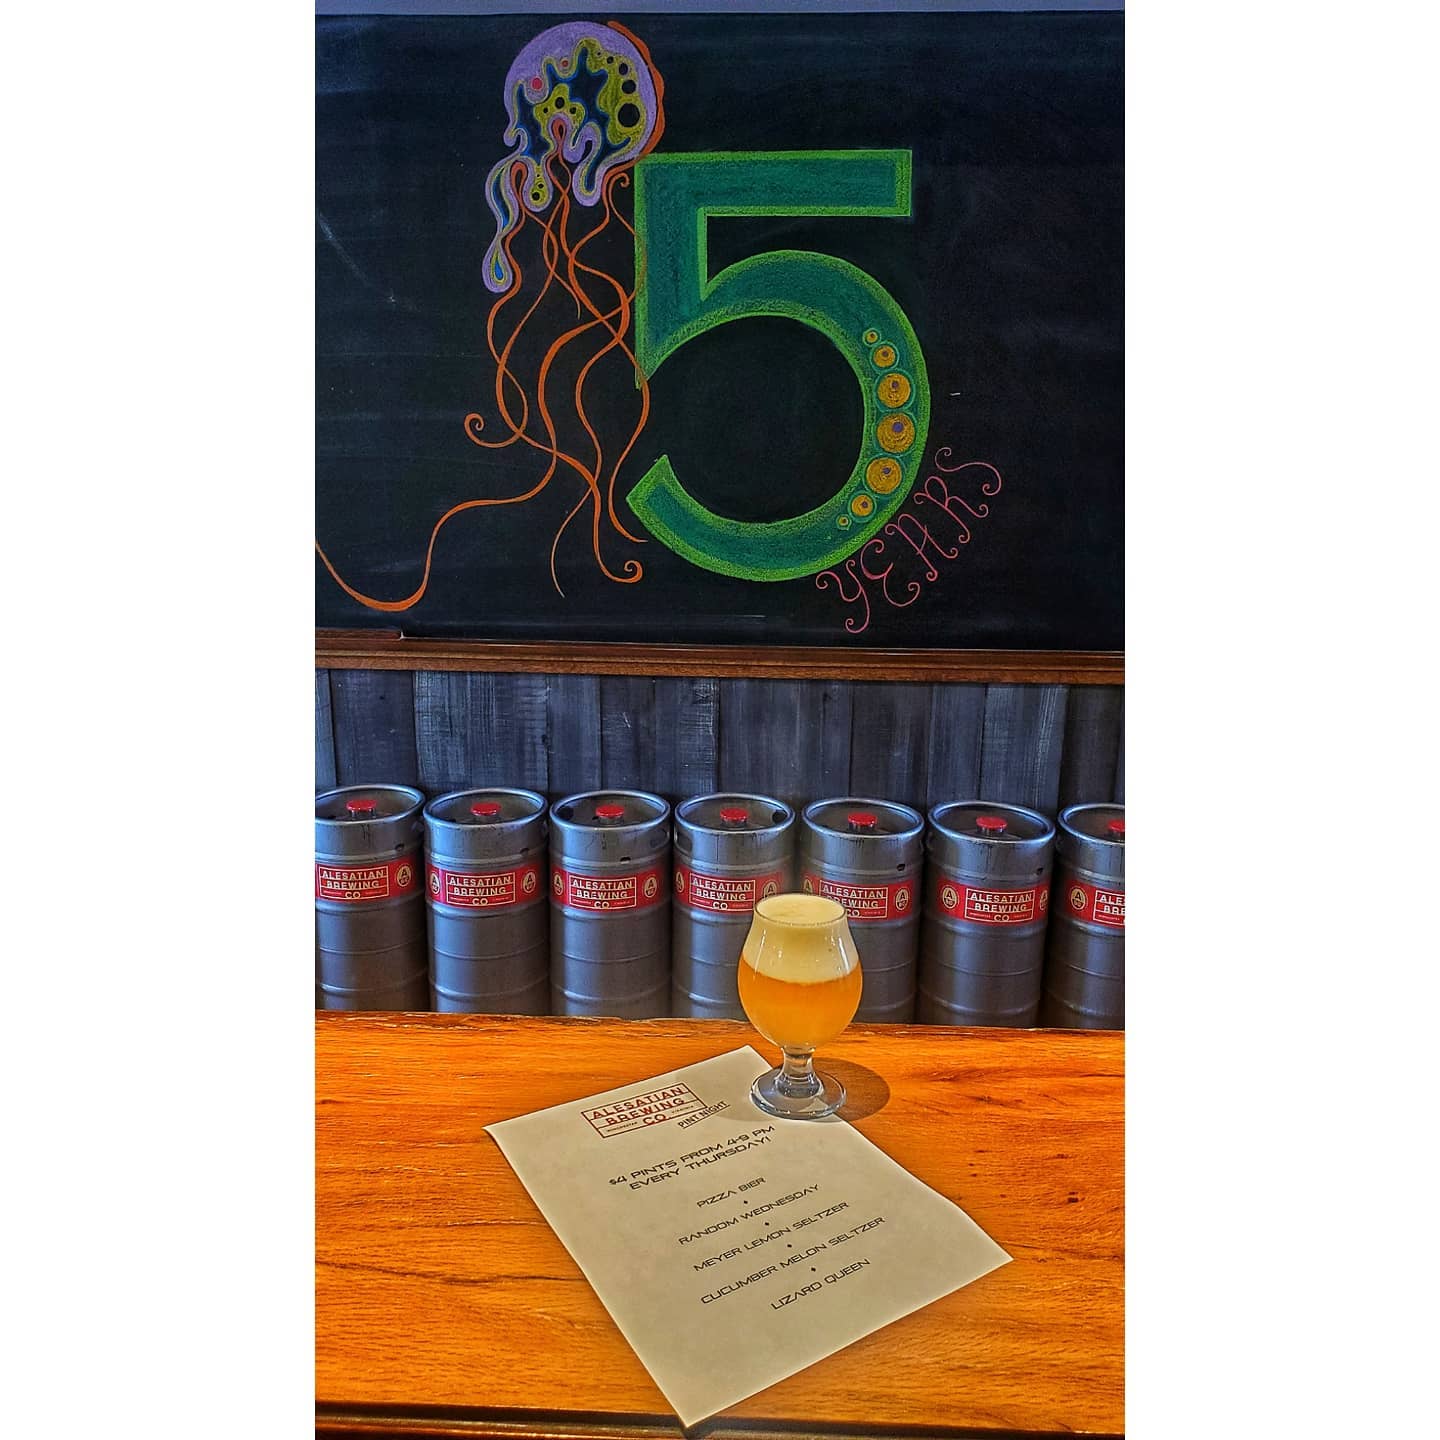 Our 5 Year Anniversary AND Pint Night?! How lucky are we?! Come join in on the festivities starting at 4pm!